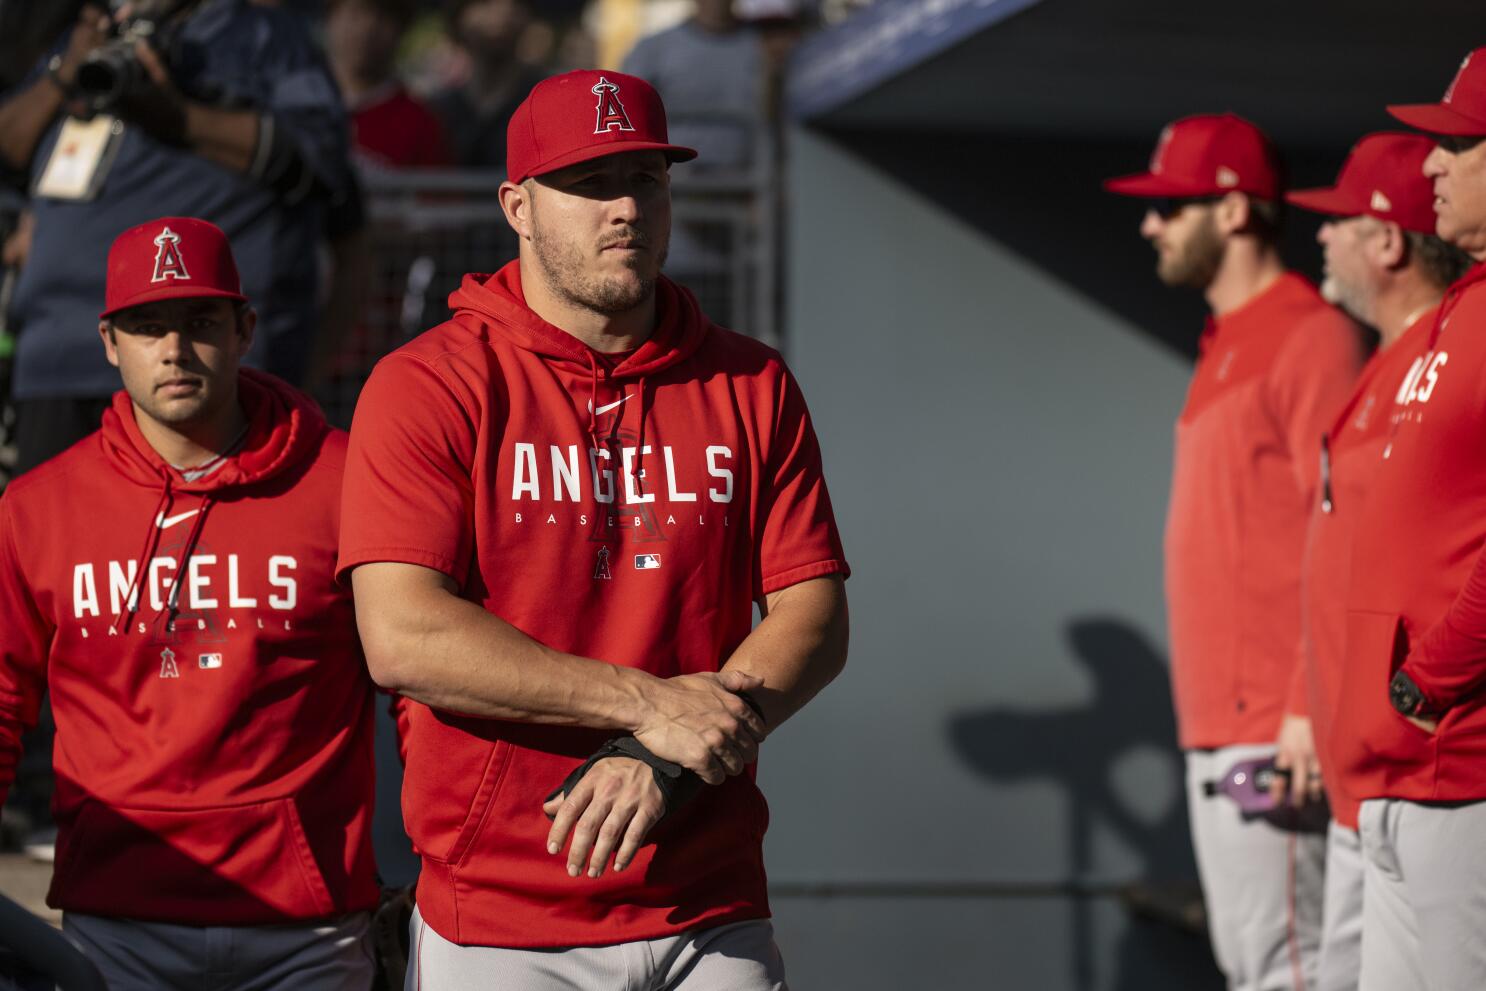 Angels' Mike Trout says season was 'frustrating' - Los Angeles Times